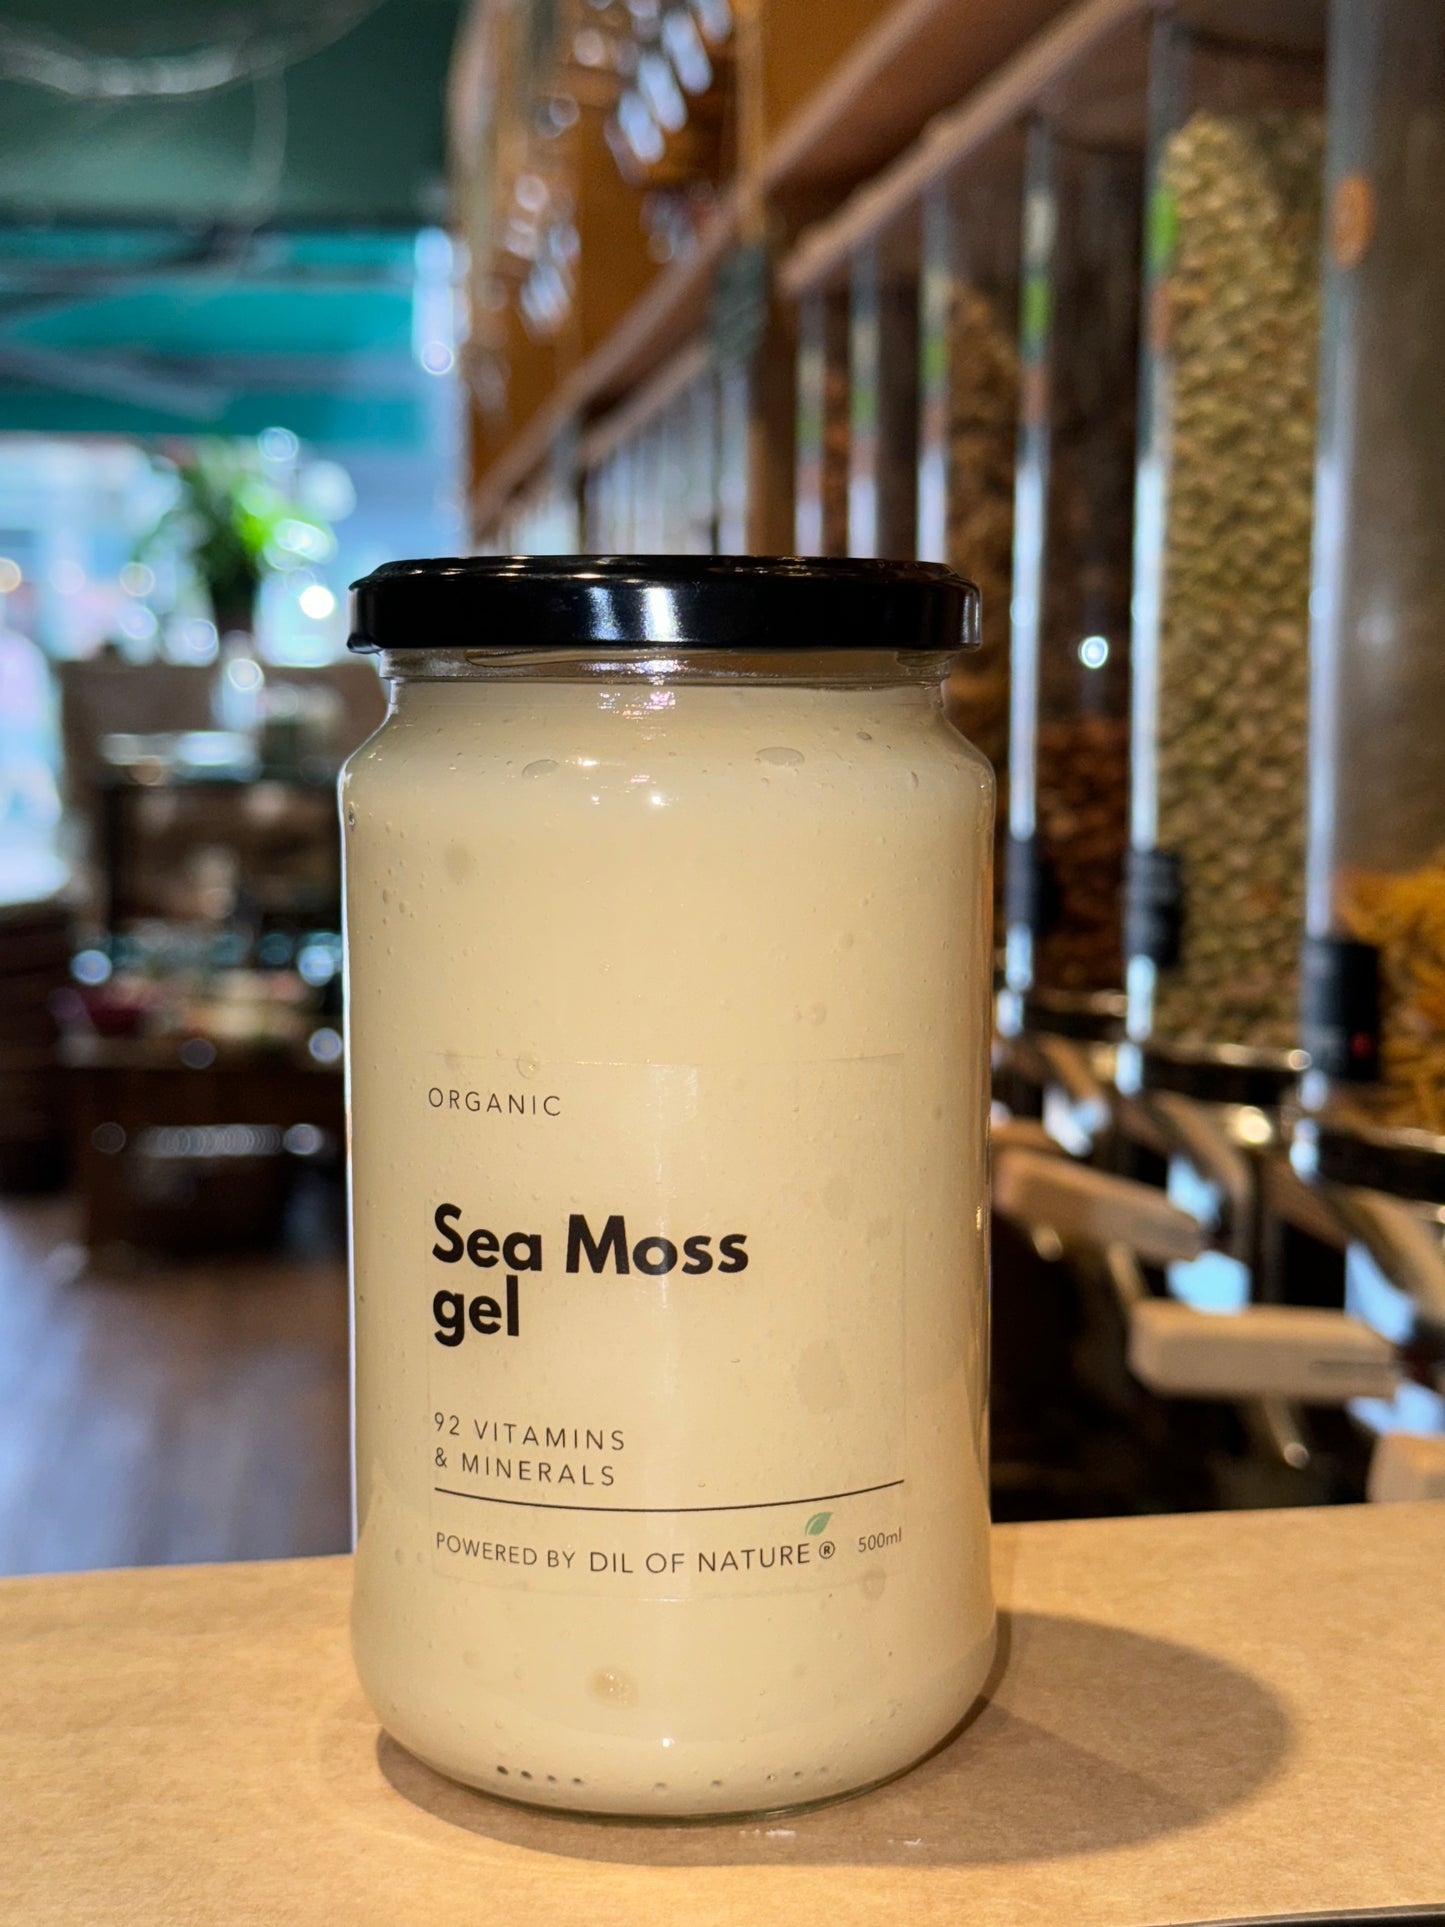 Organic and Wildcrafted Sea Moss gel